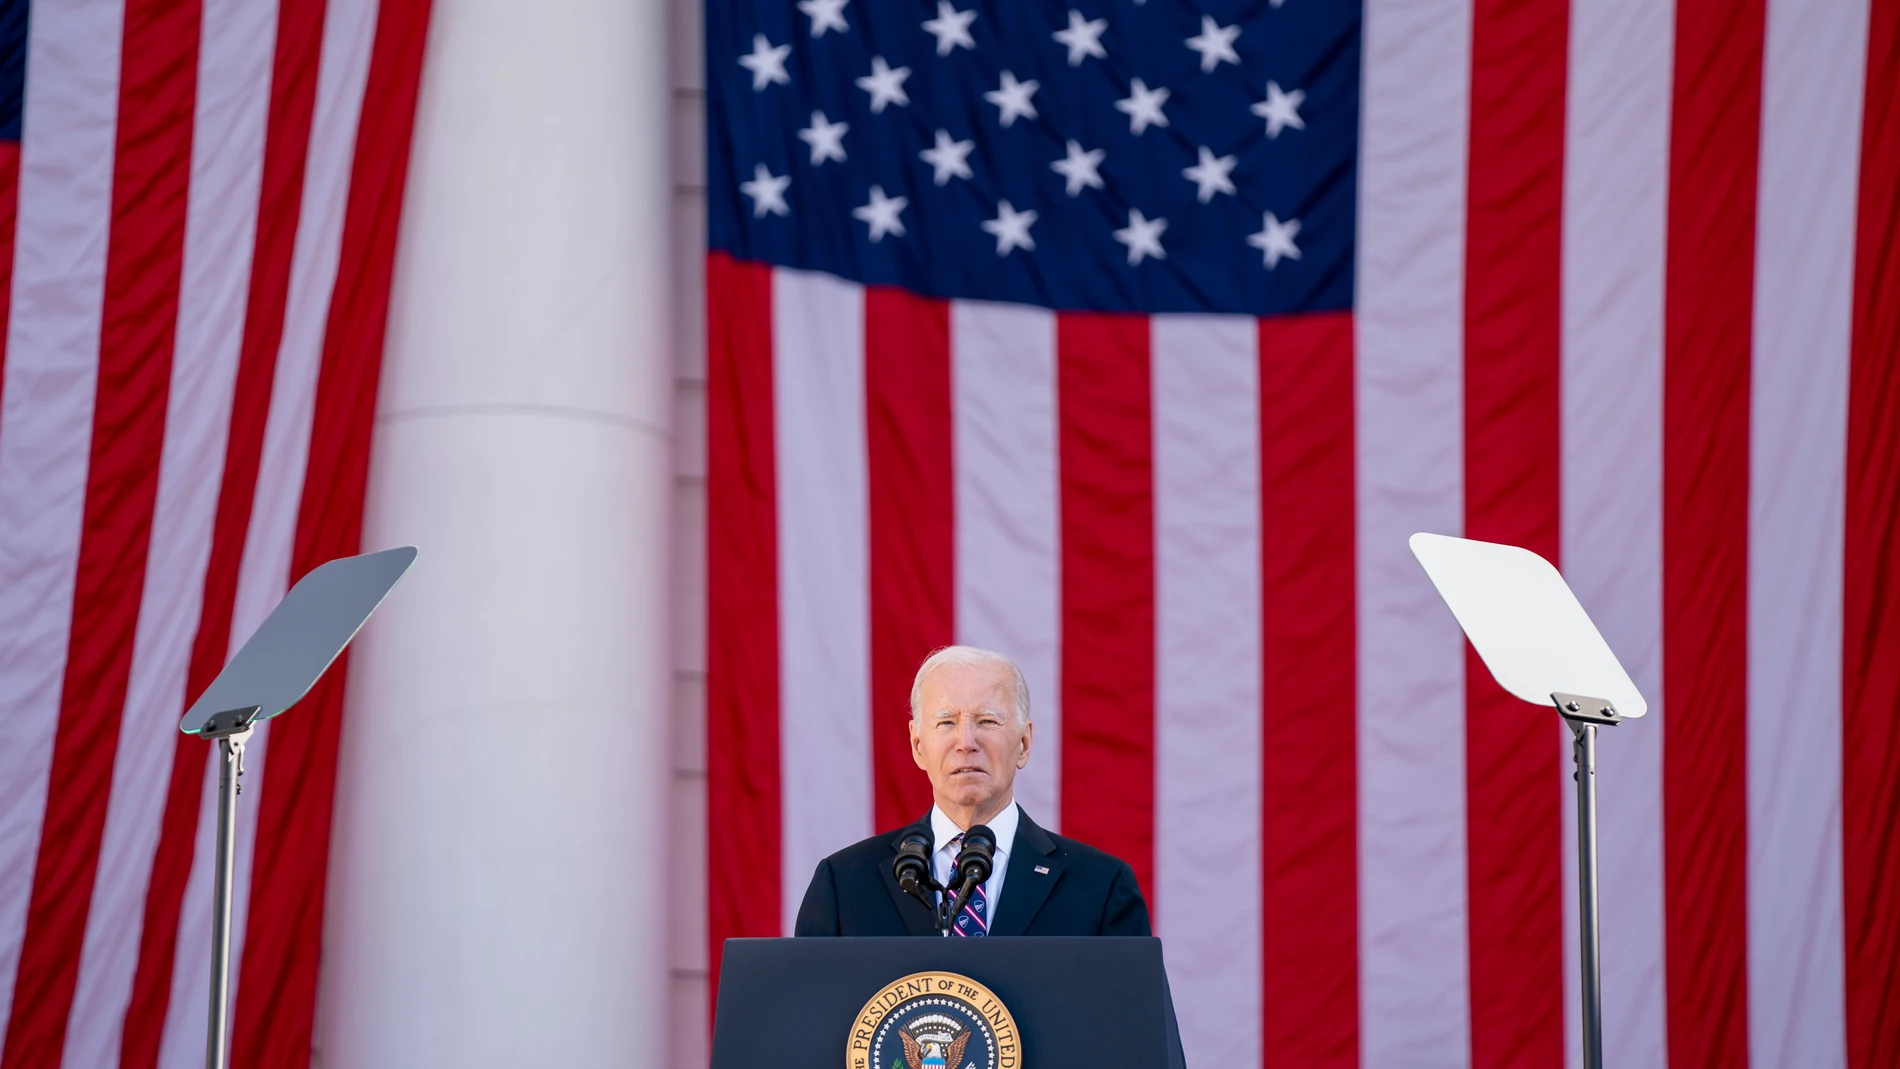 Arlington (United States), 11/11/2023.- US President Joe Biden delivers remarks at the Memorial Amphitheater as part of a National Veterans Day Observance at the Arlington National Cemetery in Arlington, Virginia, USA, 11 November 2023. The Veterans Day National Ceremony is held annually on 11 November at Arlington National Cemetery. EFE/EPA/BONNIE CASH / POOL 